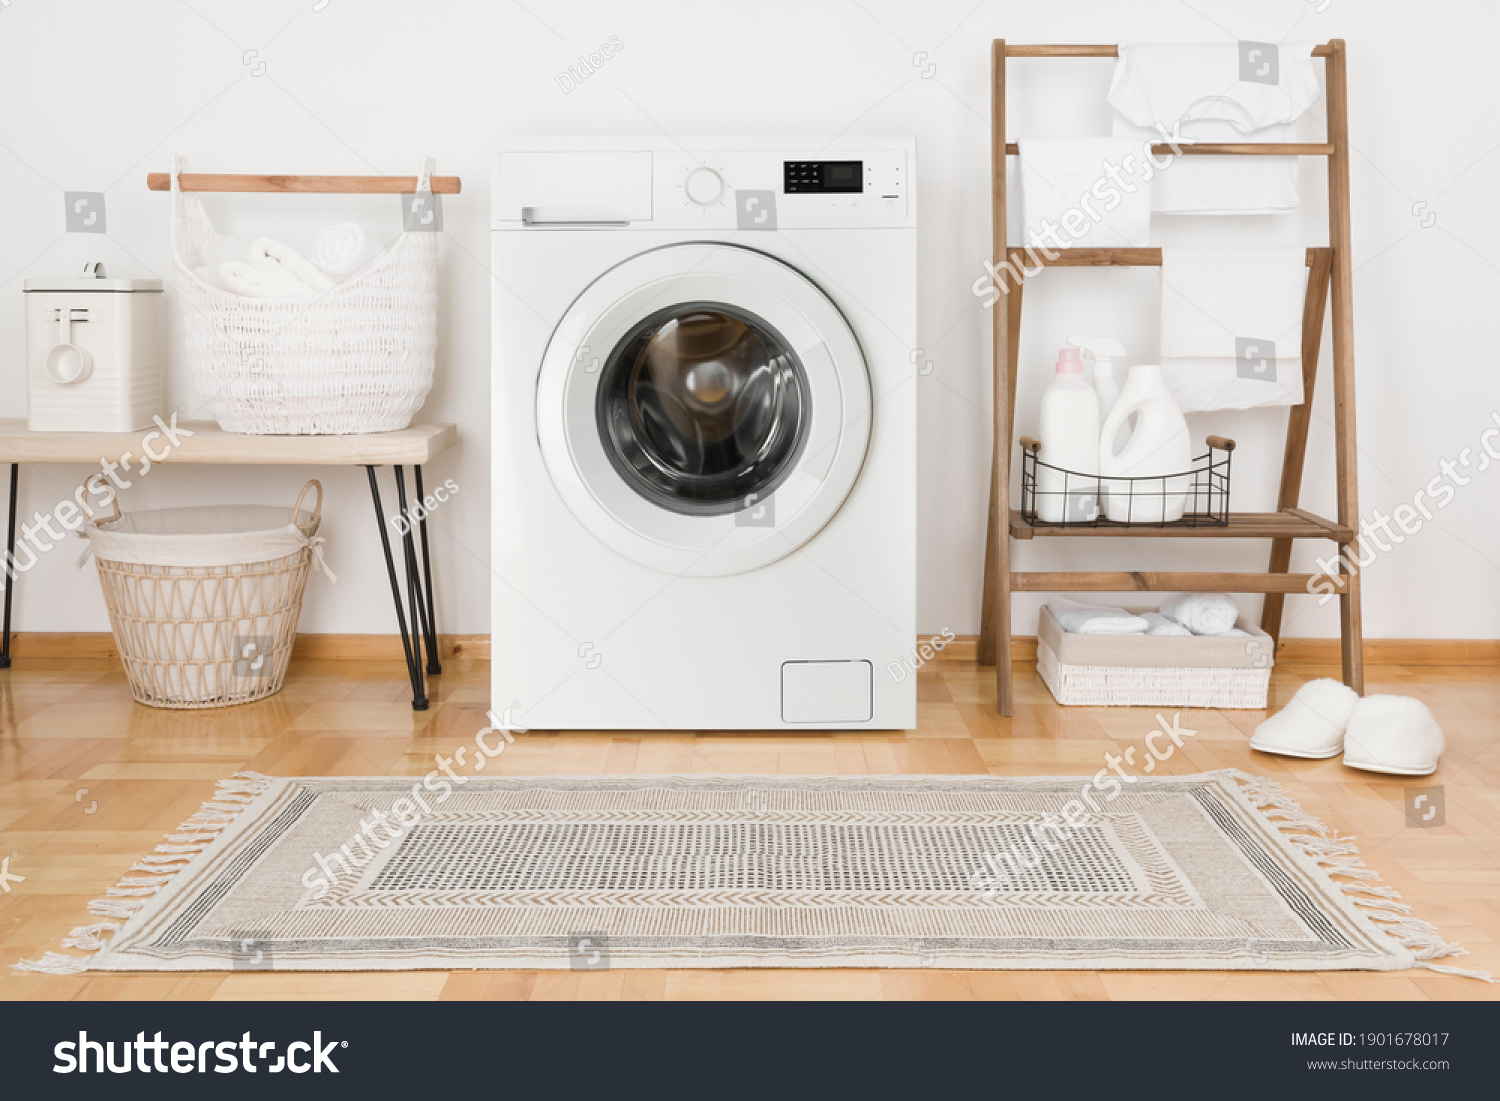 Domestic room with washing machine, baskets and laundry essential things #1901678017